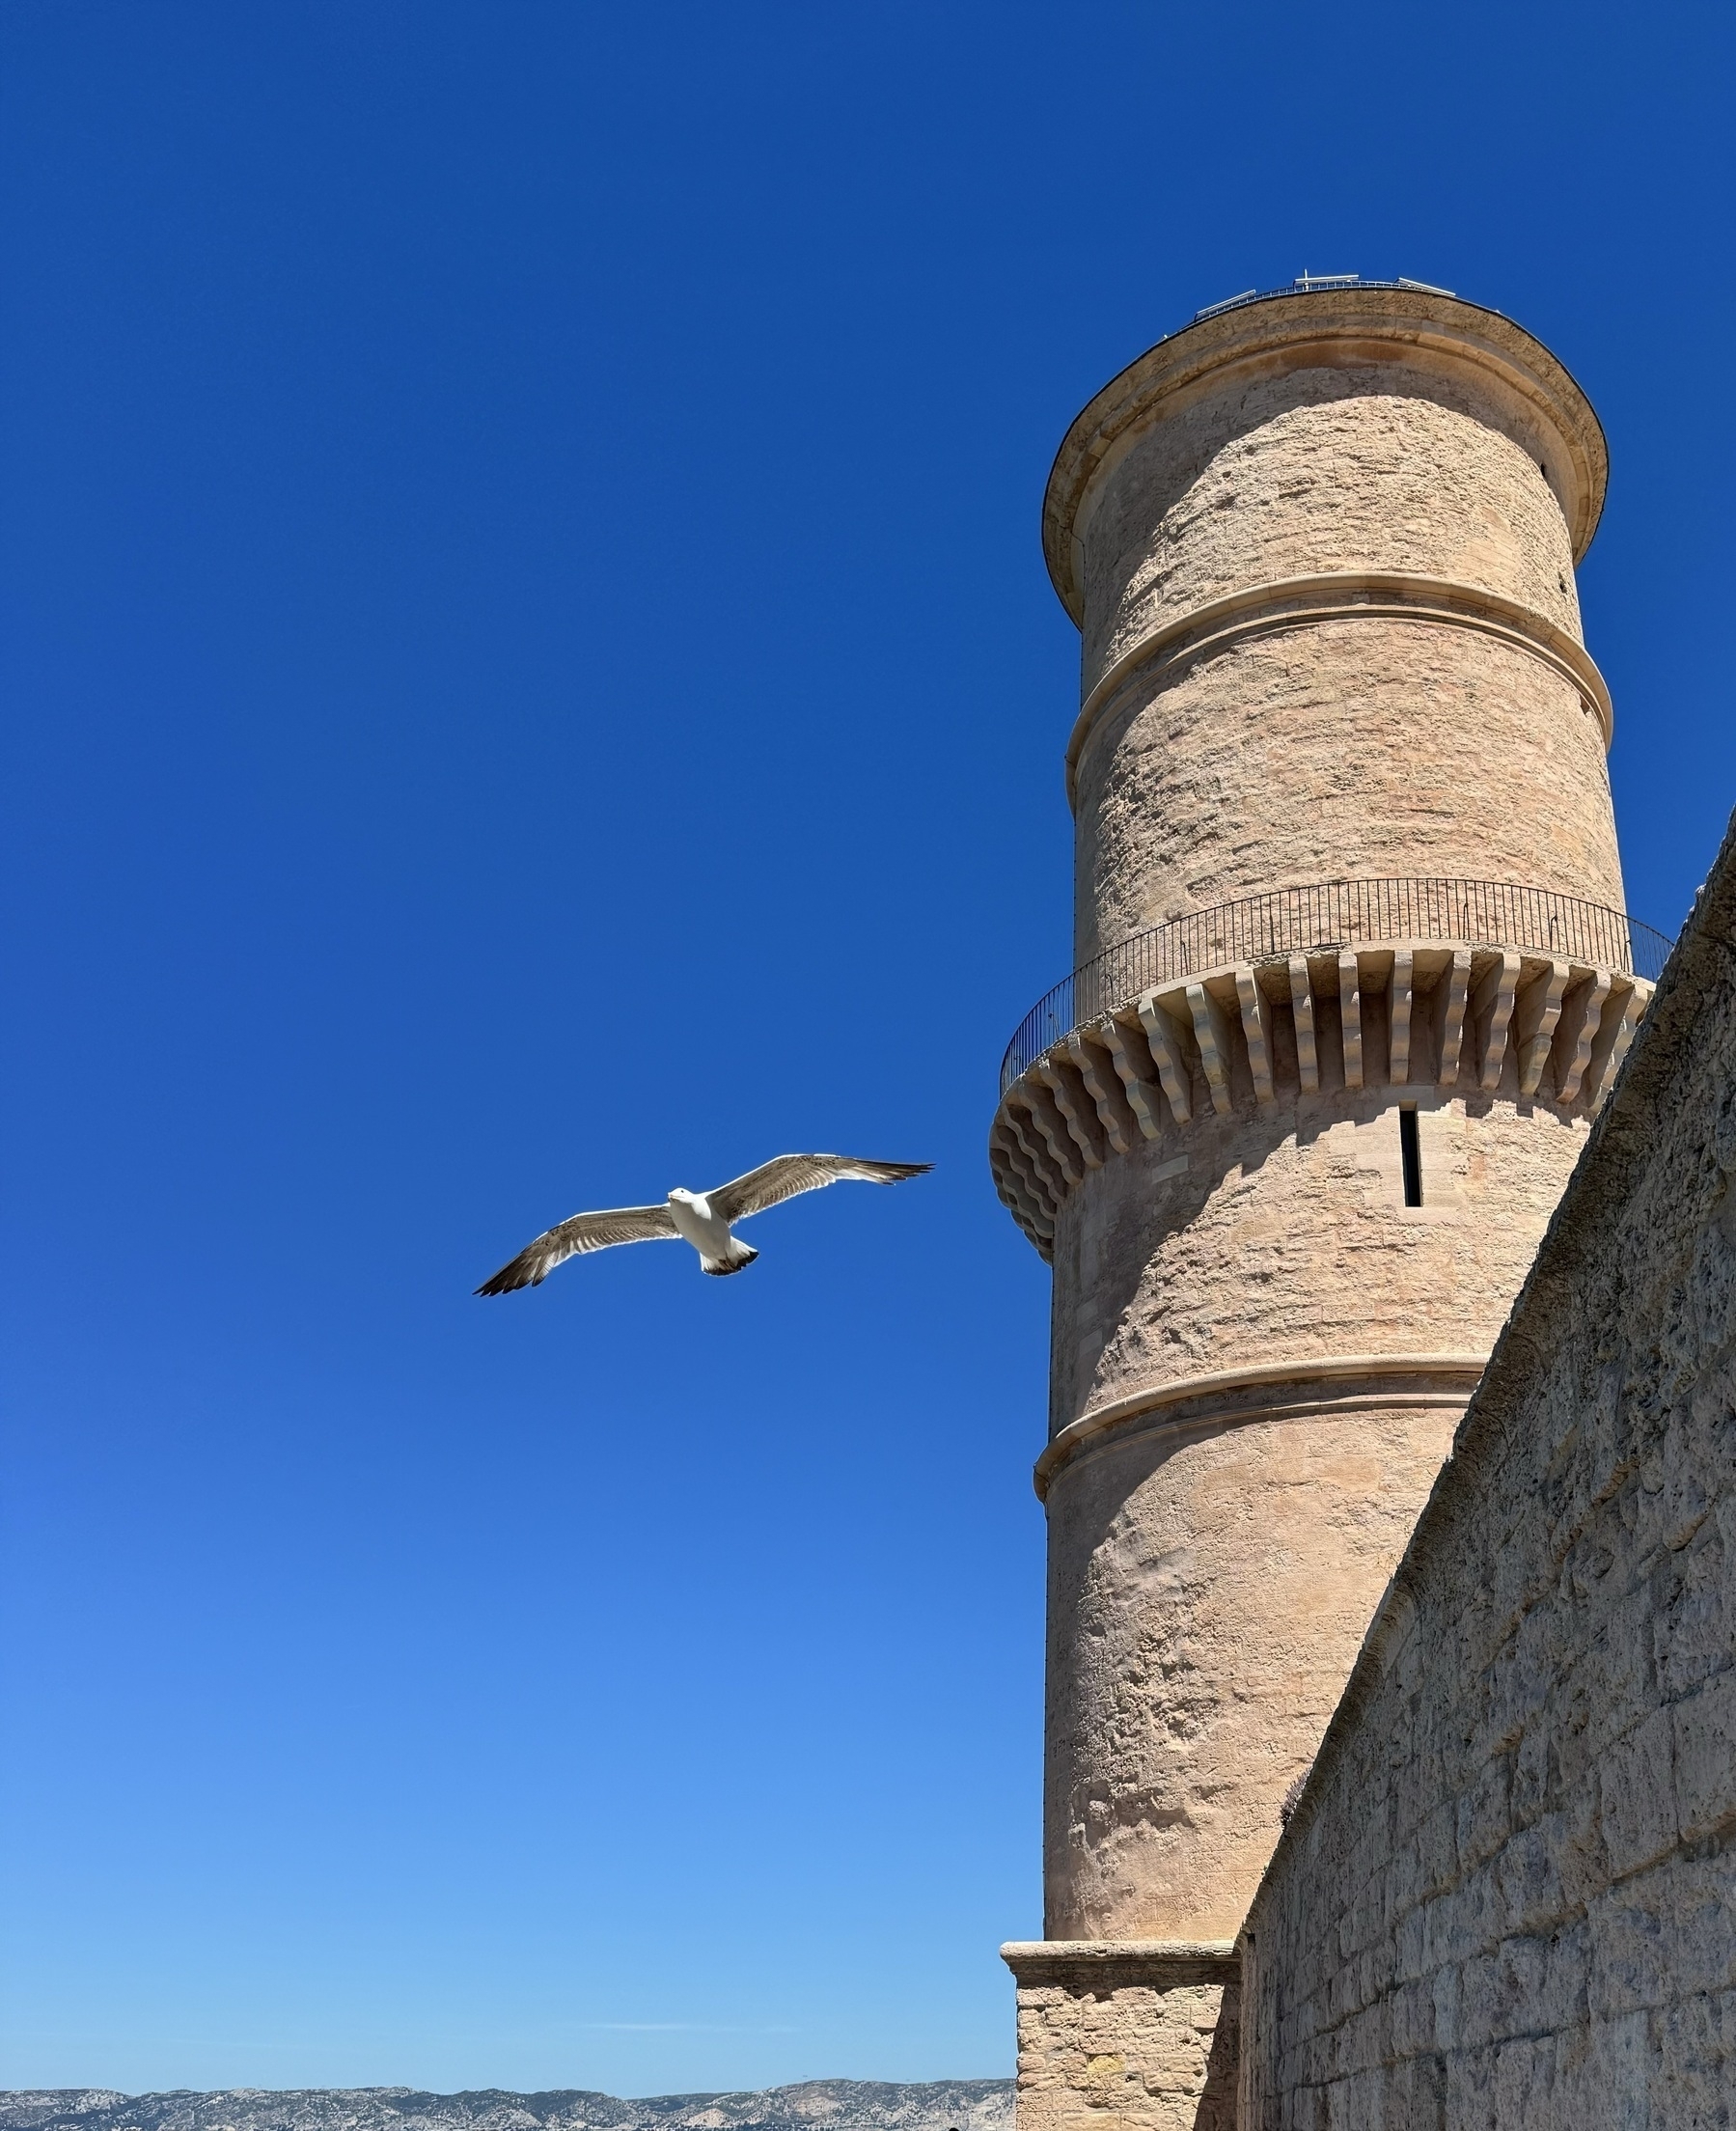 A seagull flying next to a stone tower, with a flawless blue sky in the background.